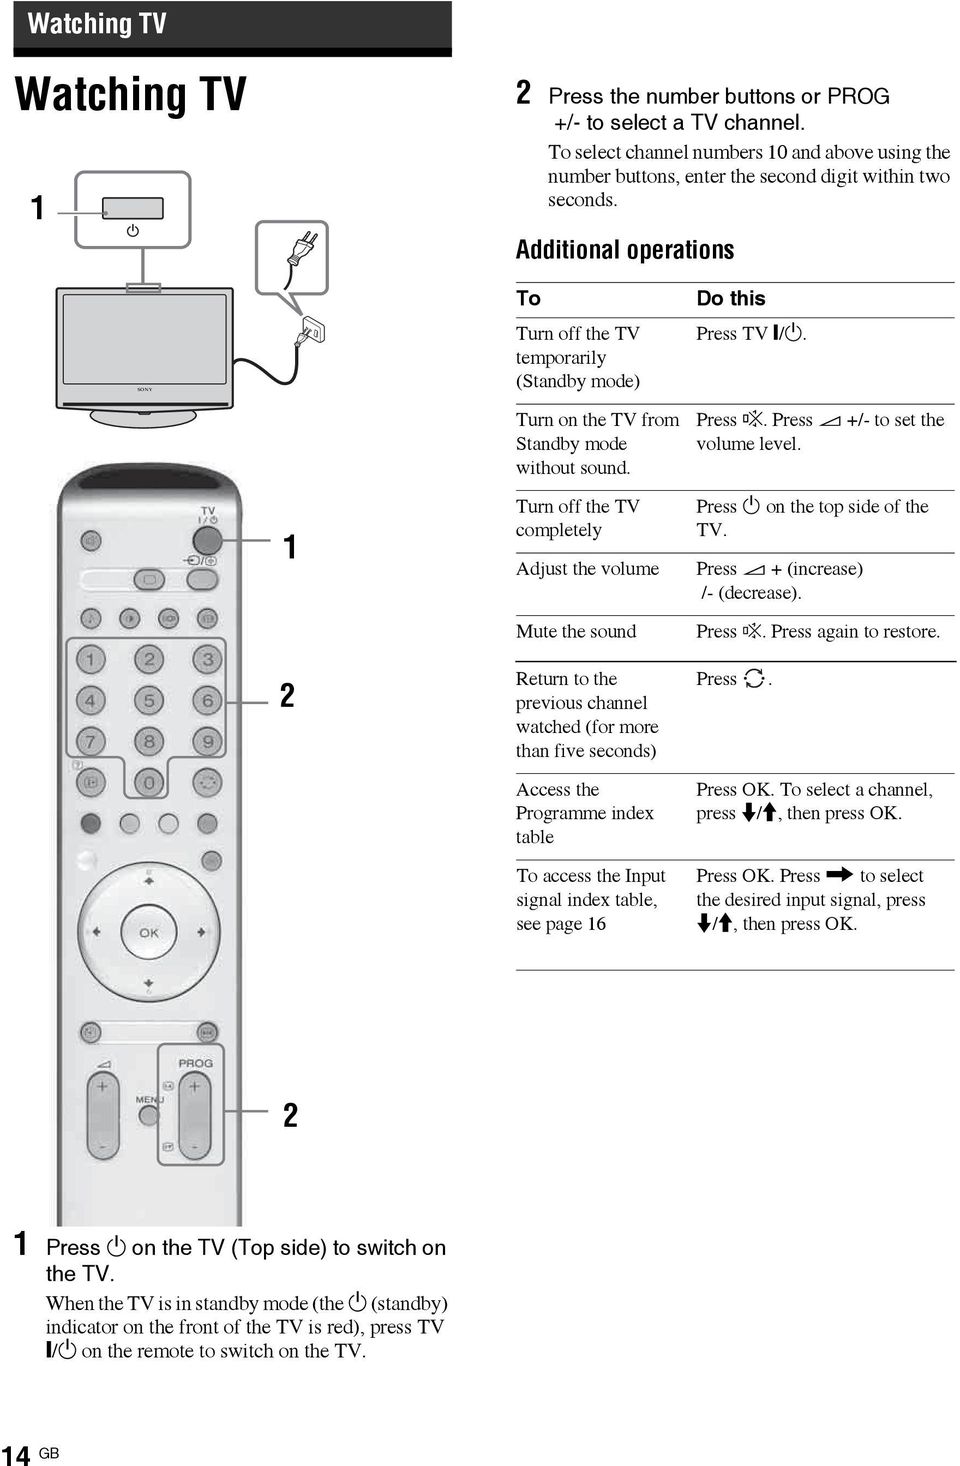 1 2 Turn off the TV completely Adjust the volume Mute the sound Return to the previous channel watched (for more than five seconds) Access the Programme index table To access the Input signal index